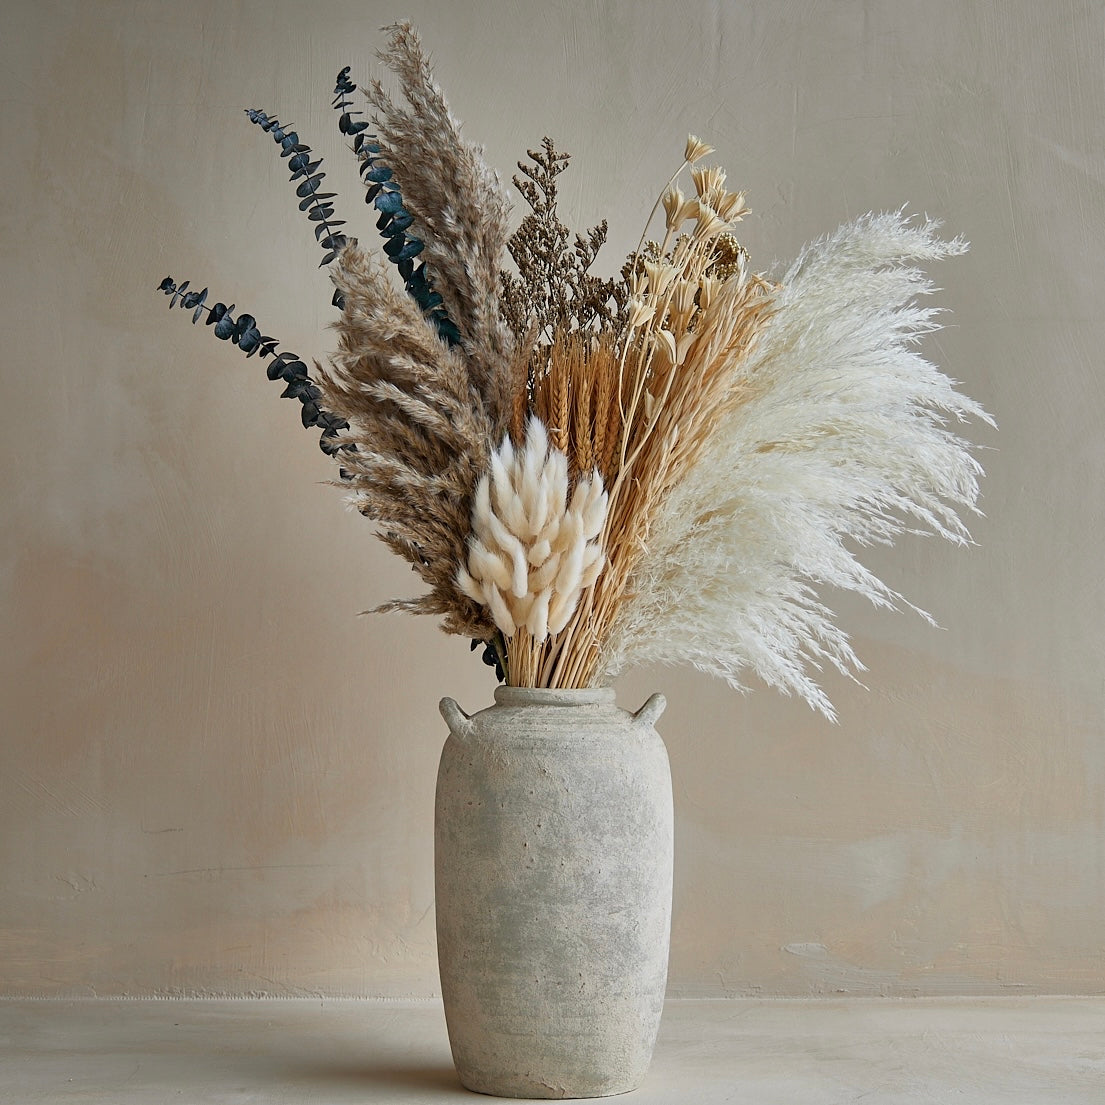 CoCopeaunt Dried Flower Arrangement with Vasedried Flower Bouquet with Vase Dried  Flowers with Stems (Style 5) 